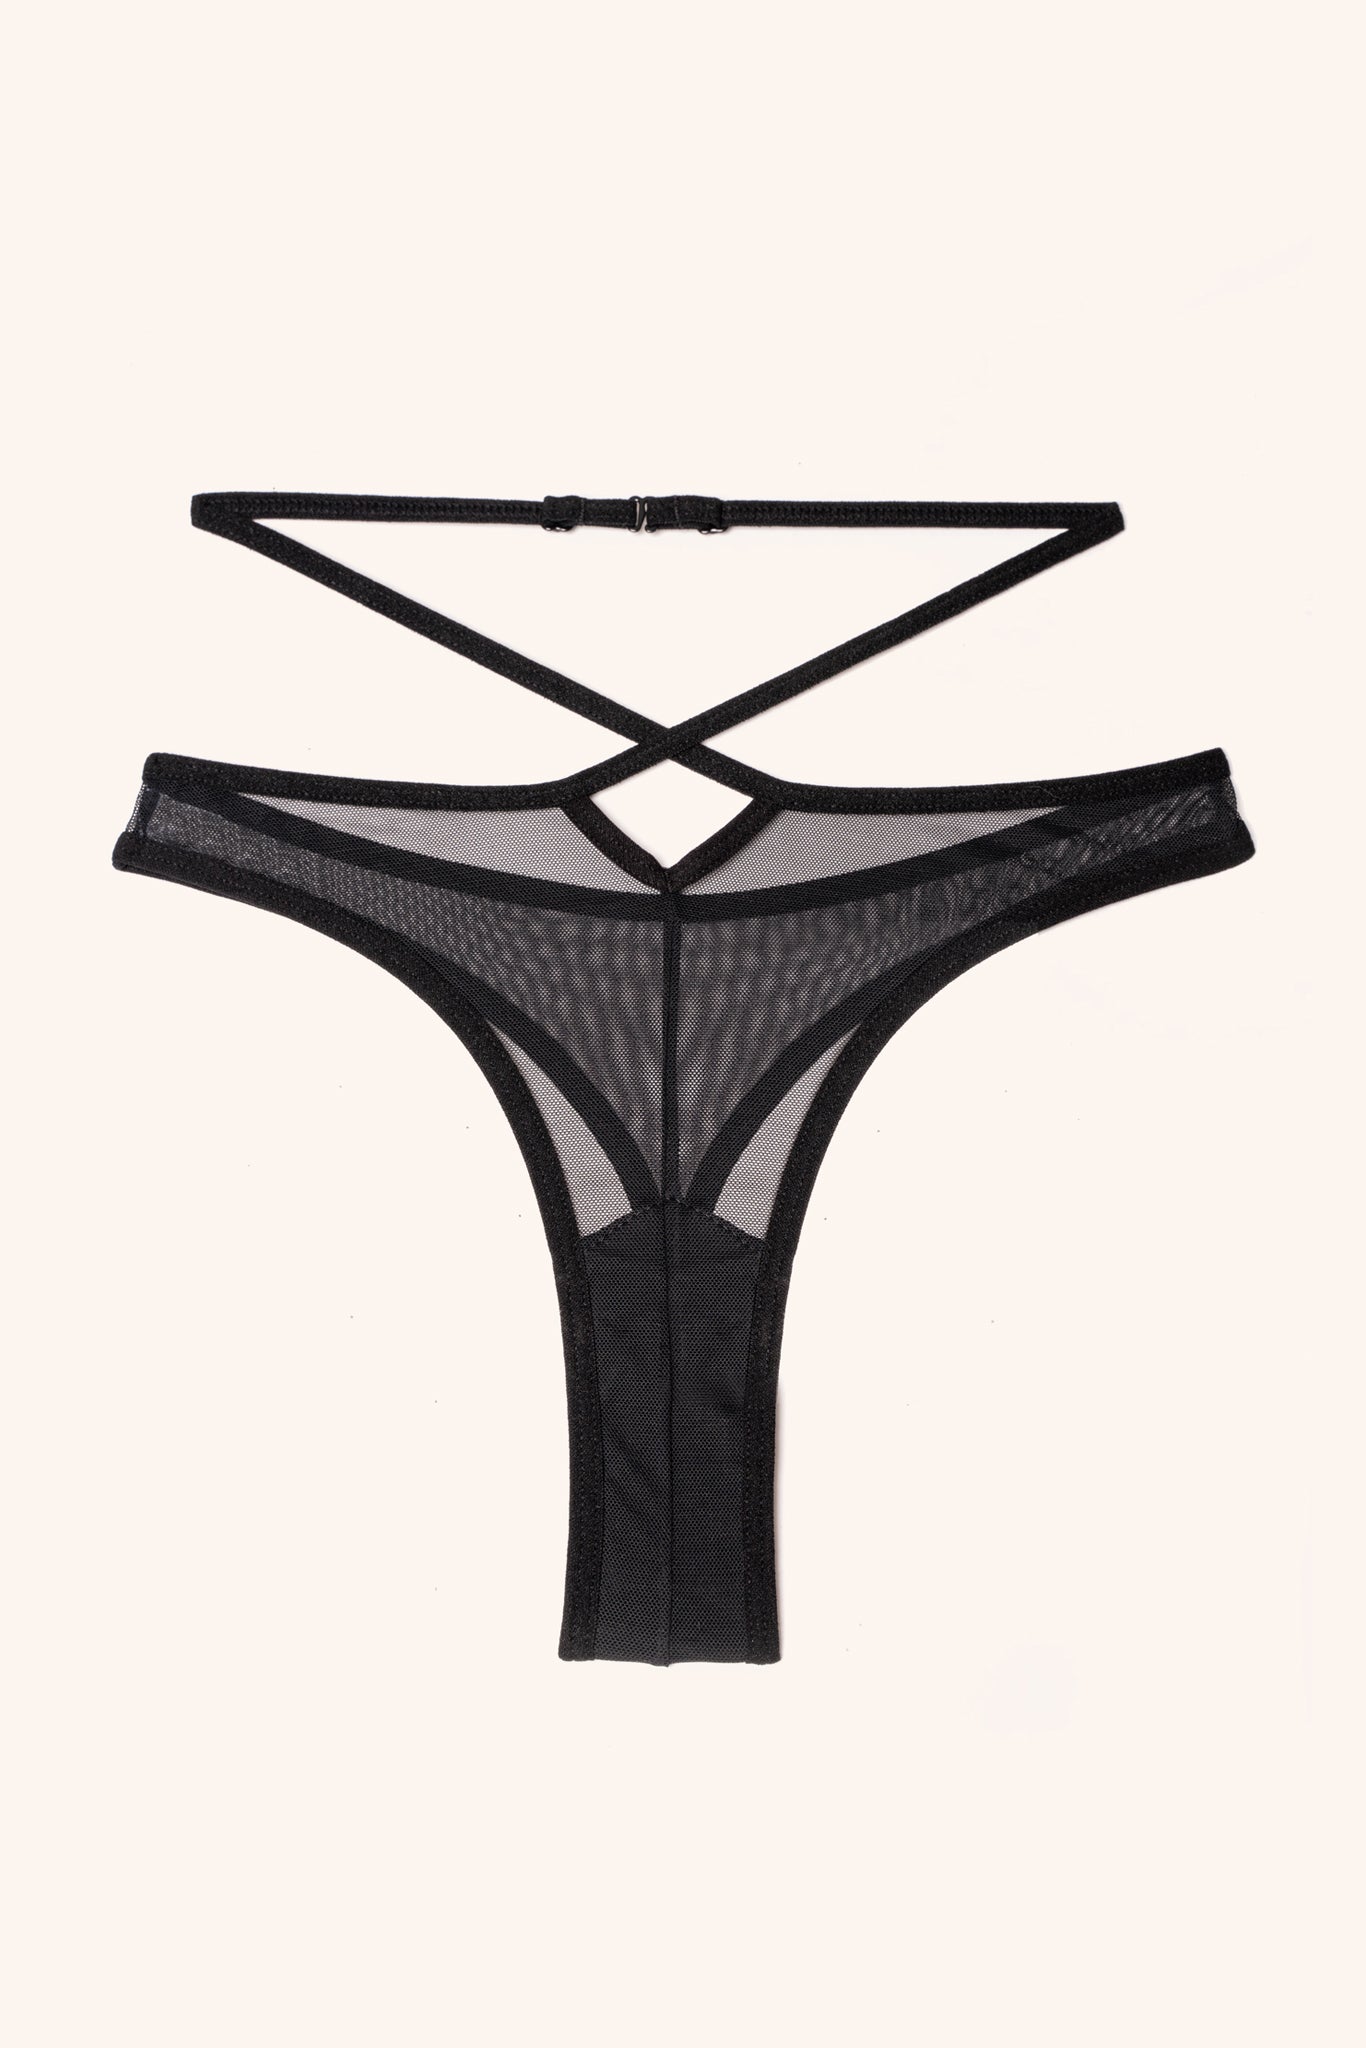 Oola Lingerie offering 50% off knickers when you buy one of their bras